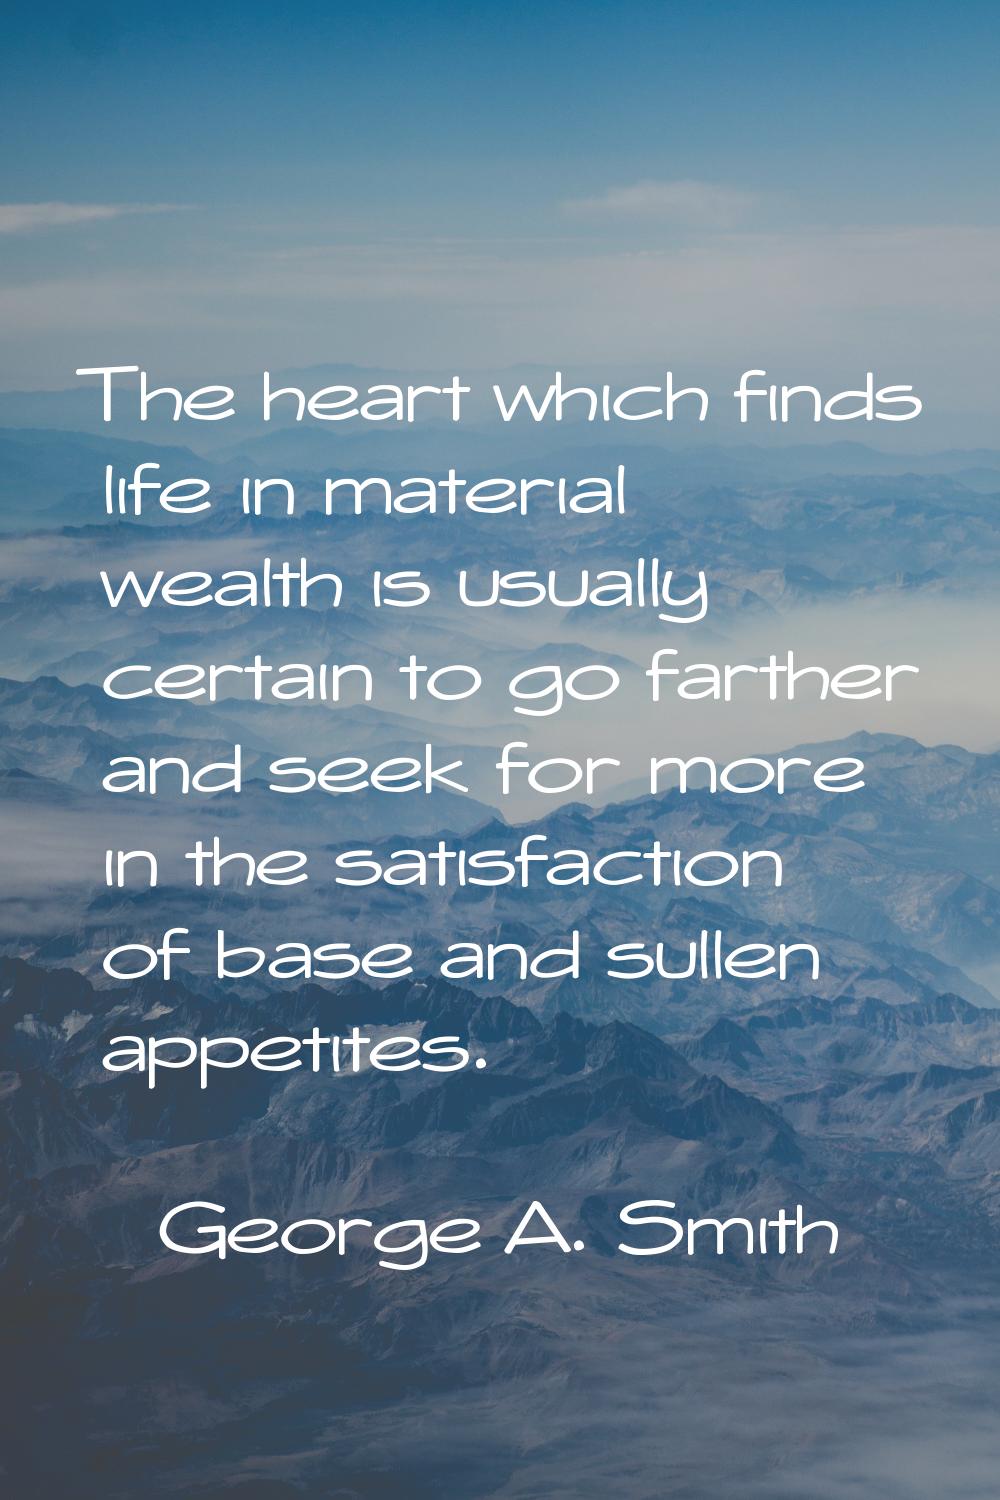 The heart which finds life in material wealth is usually certain to go farther and seek for more in